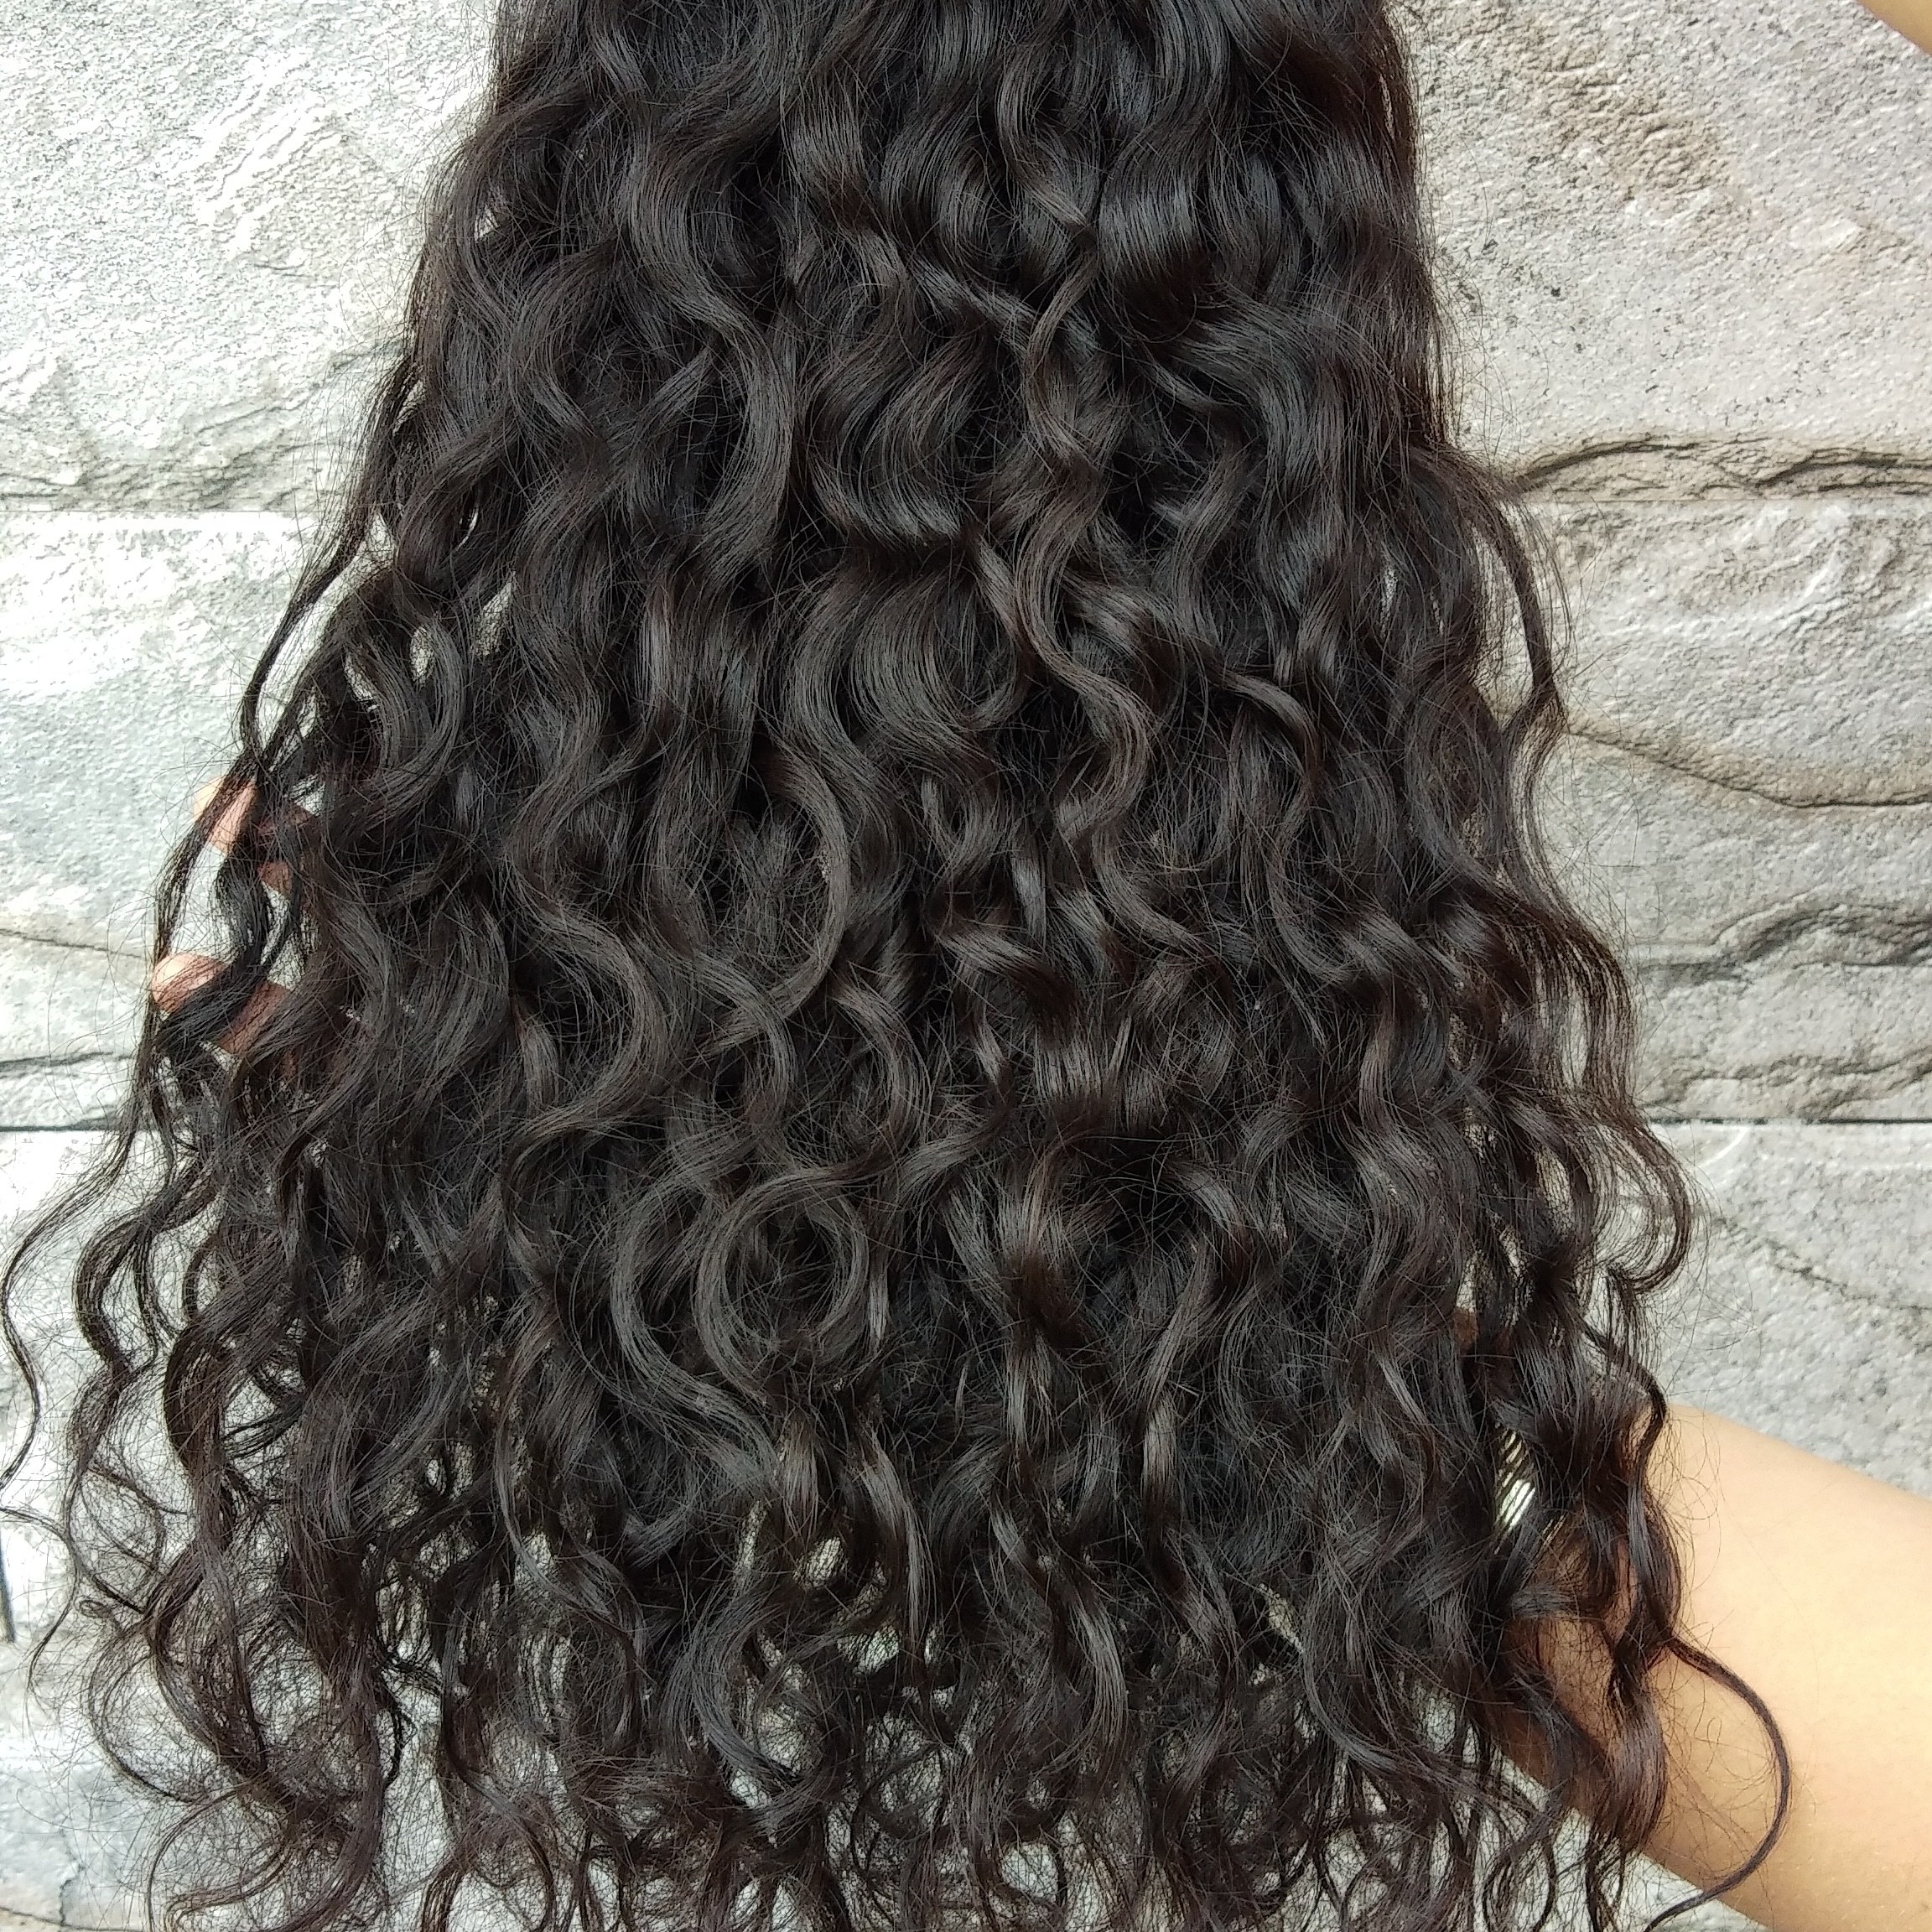 Indian Temple Soft Curly Hair